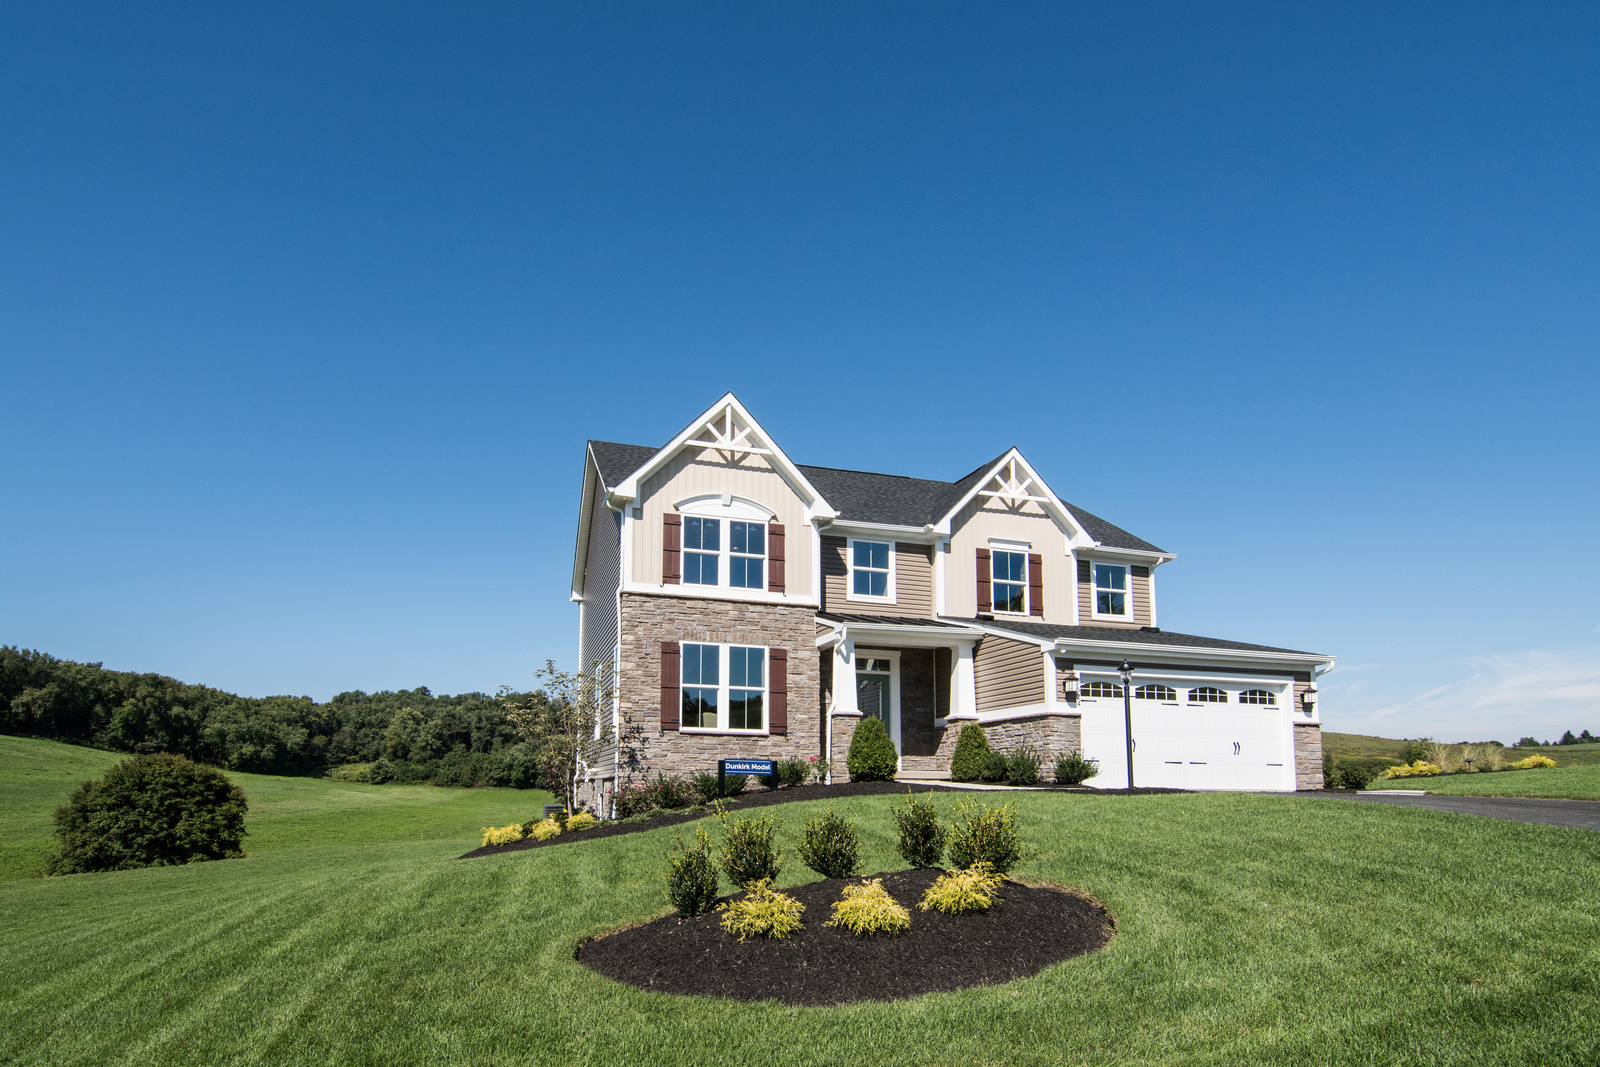 new-homes-for-sale-at-overlook-estates-in-ohio-township-pa-within-the